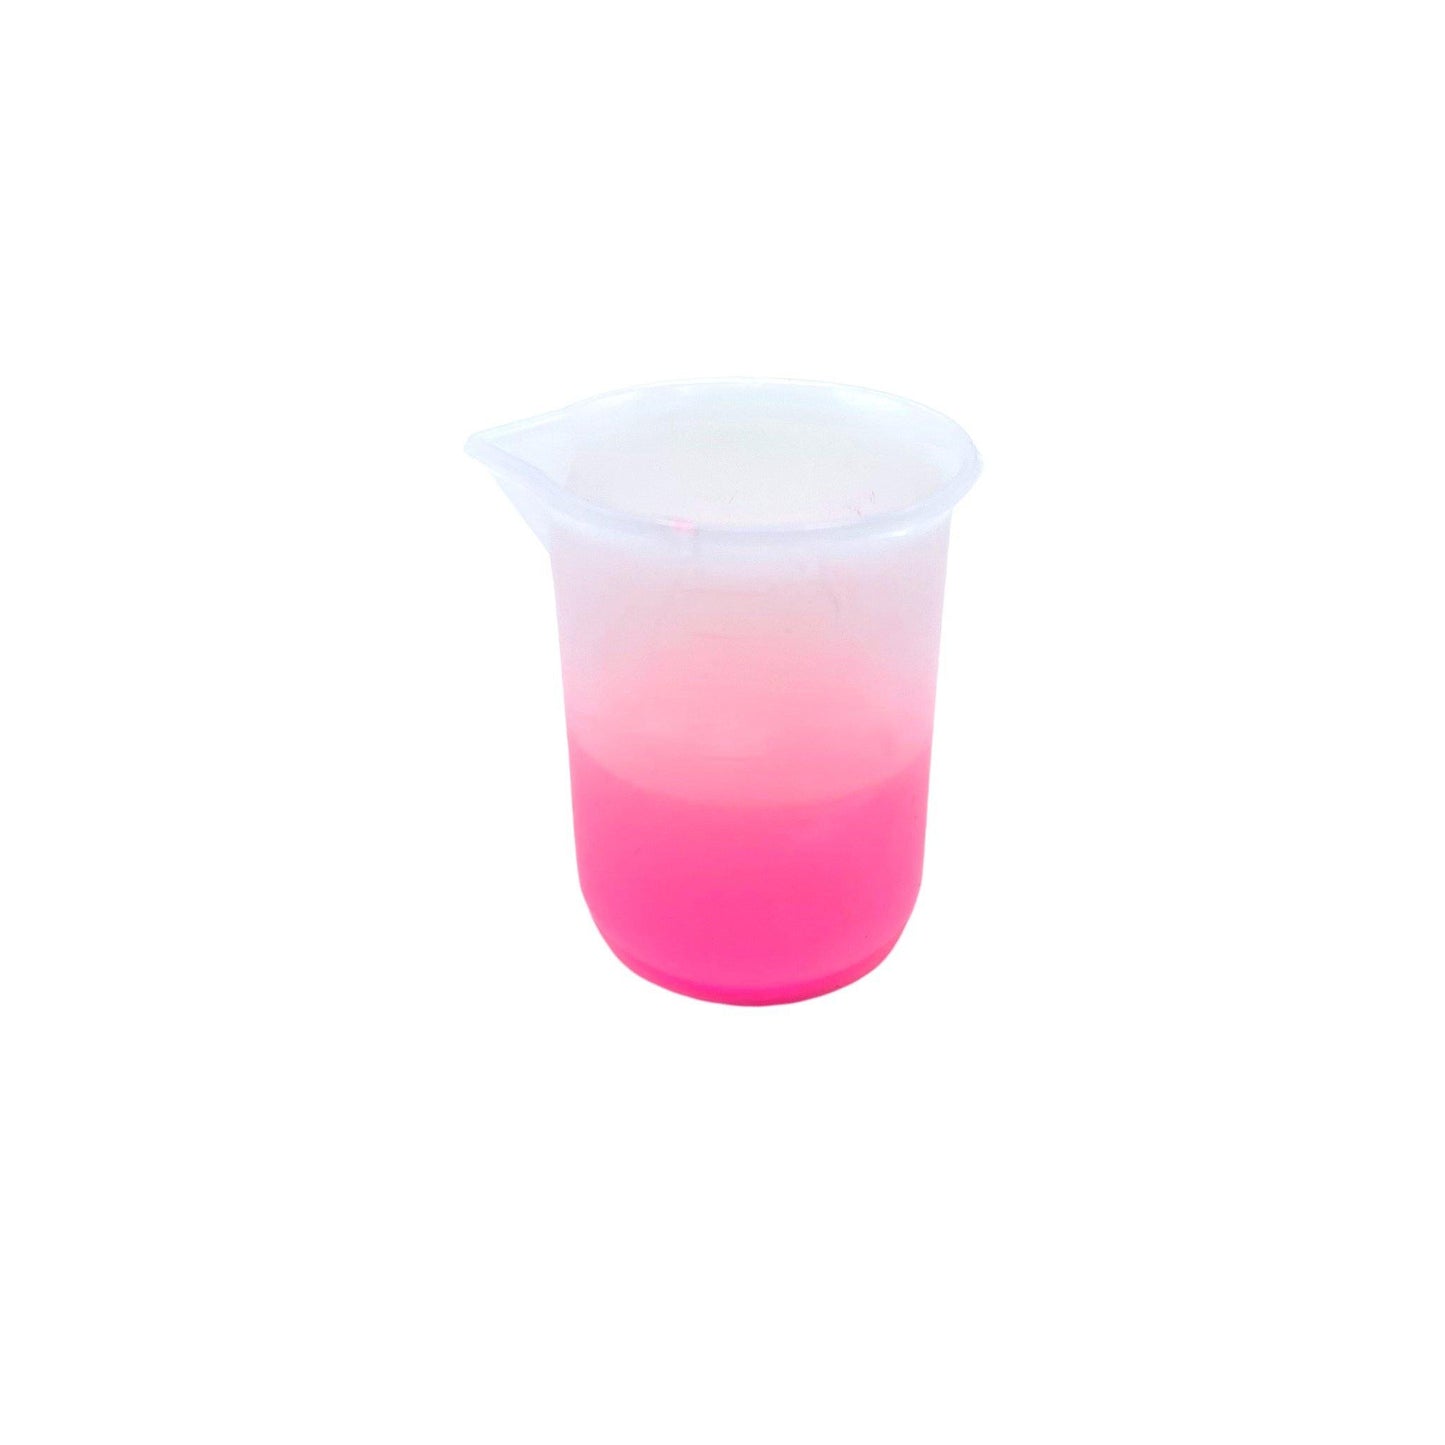 Silicone Measuring and Mixing Cups - Pretty in Pink Supply